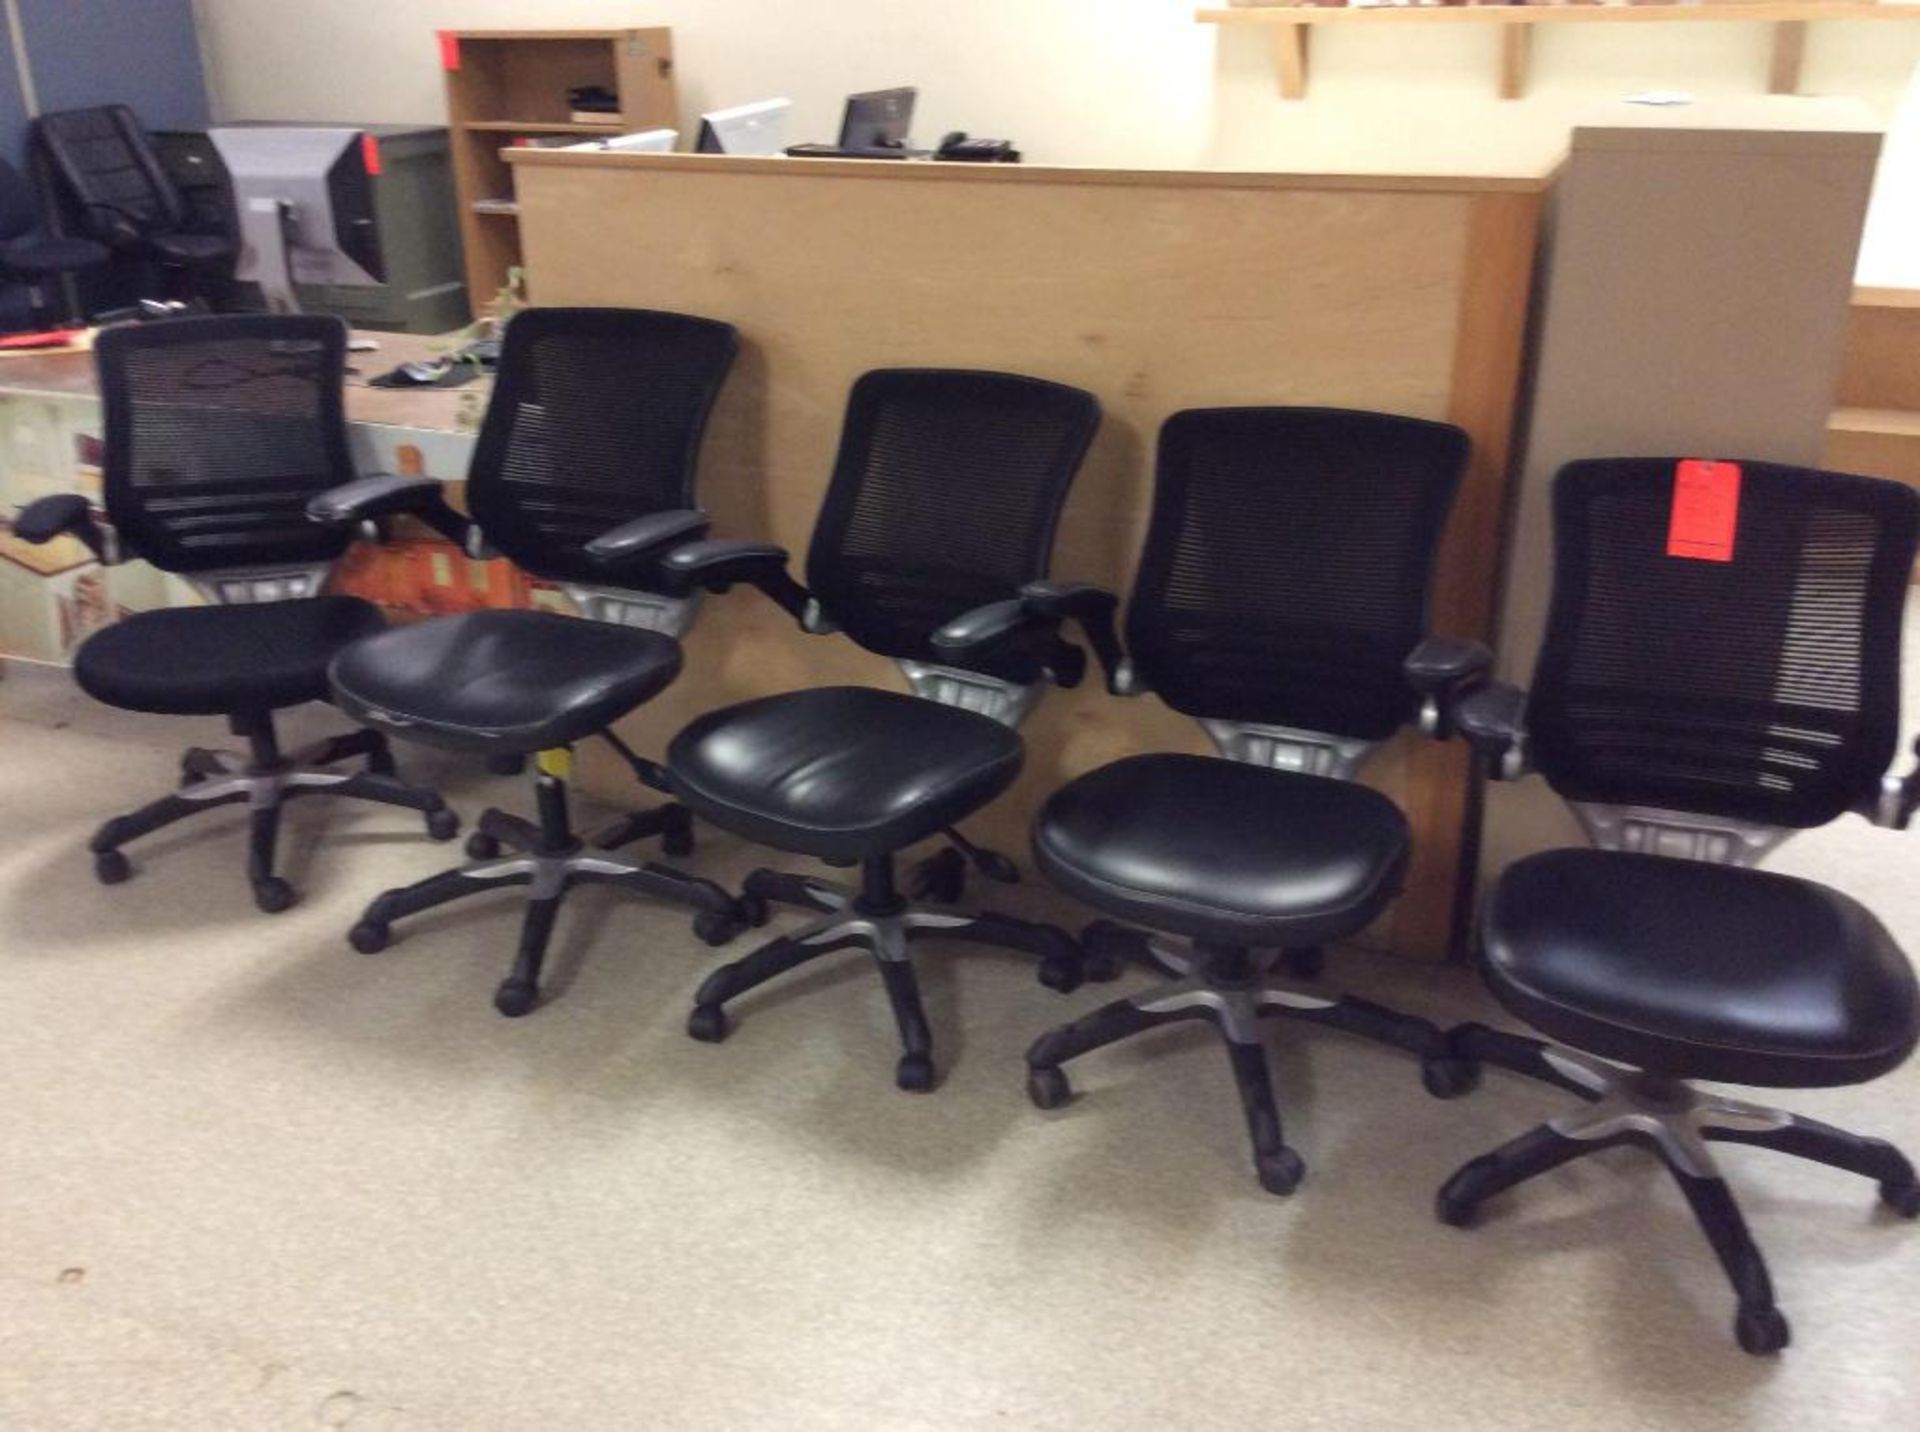 (5) assorted office chairs